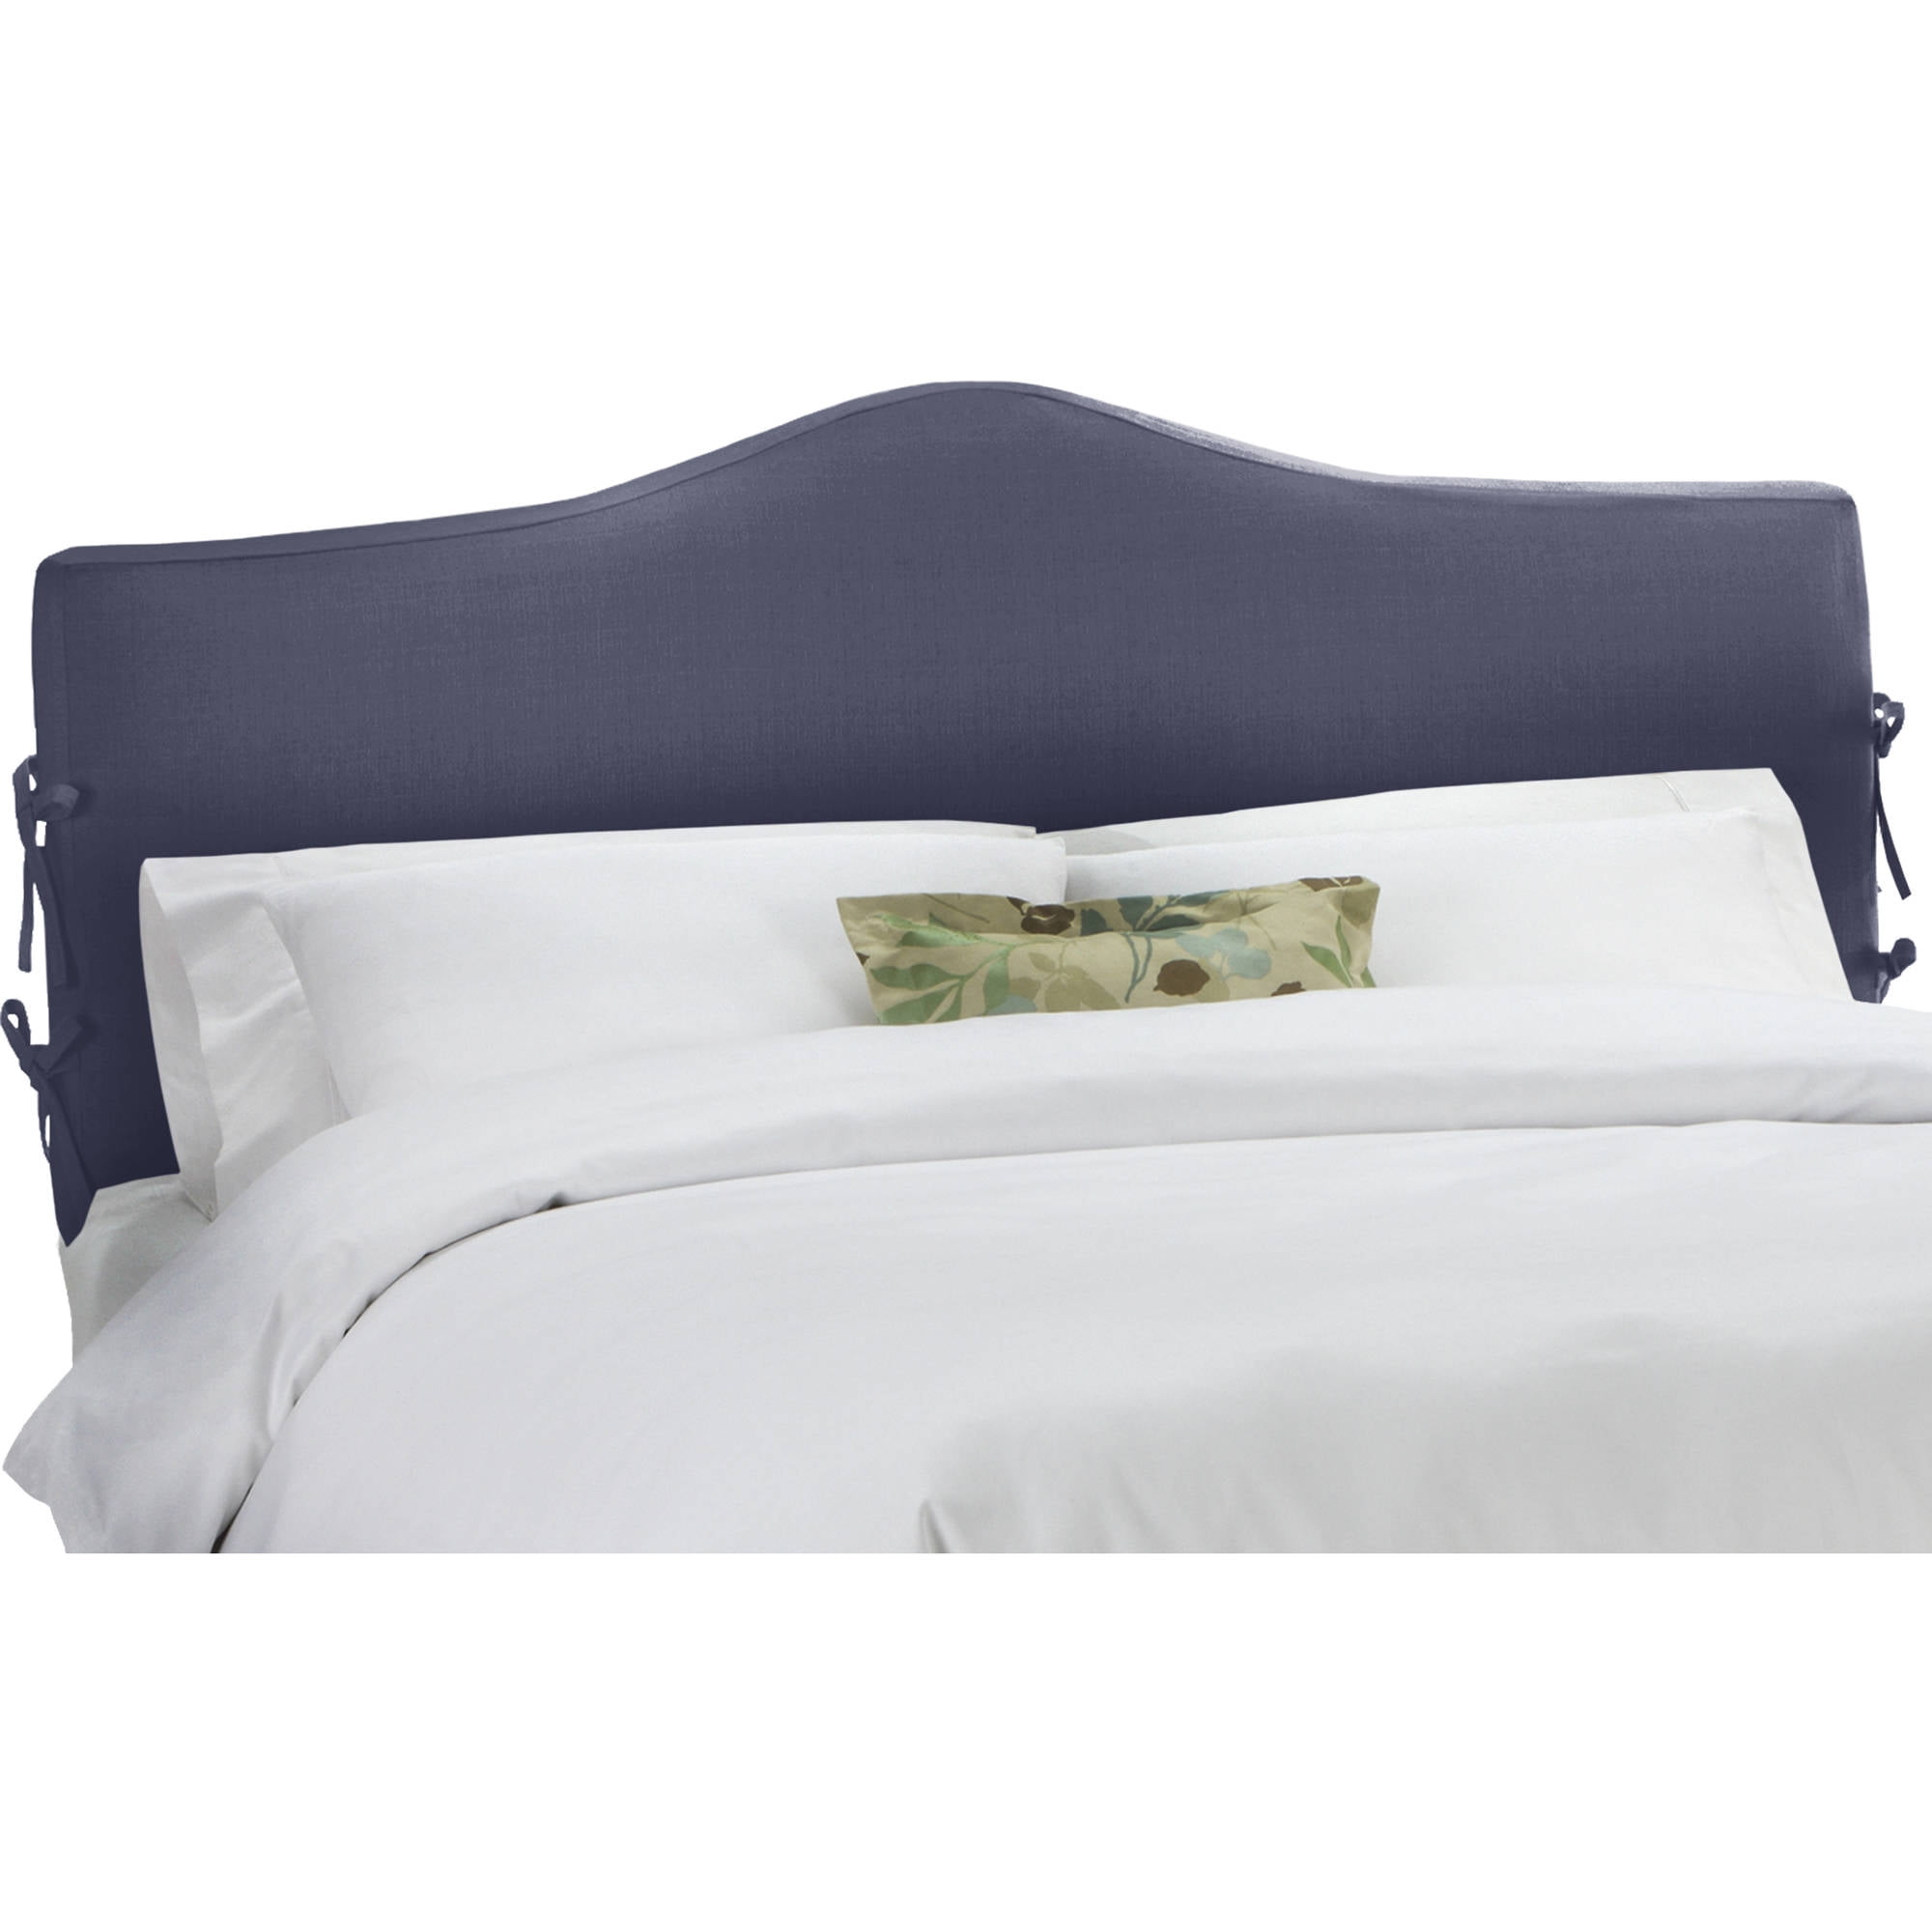 Slipcover Headboard, Multiple Sizes and Colors - Walmart.com